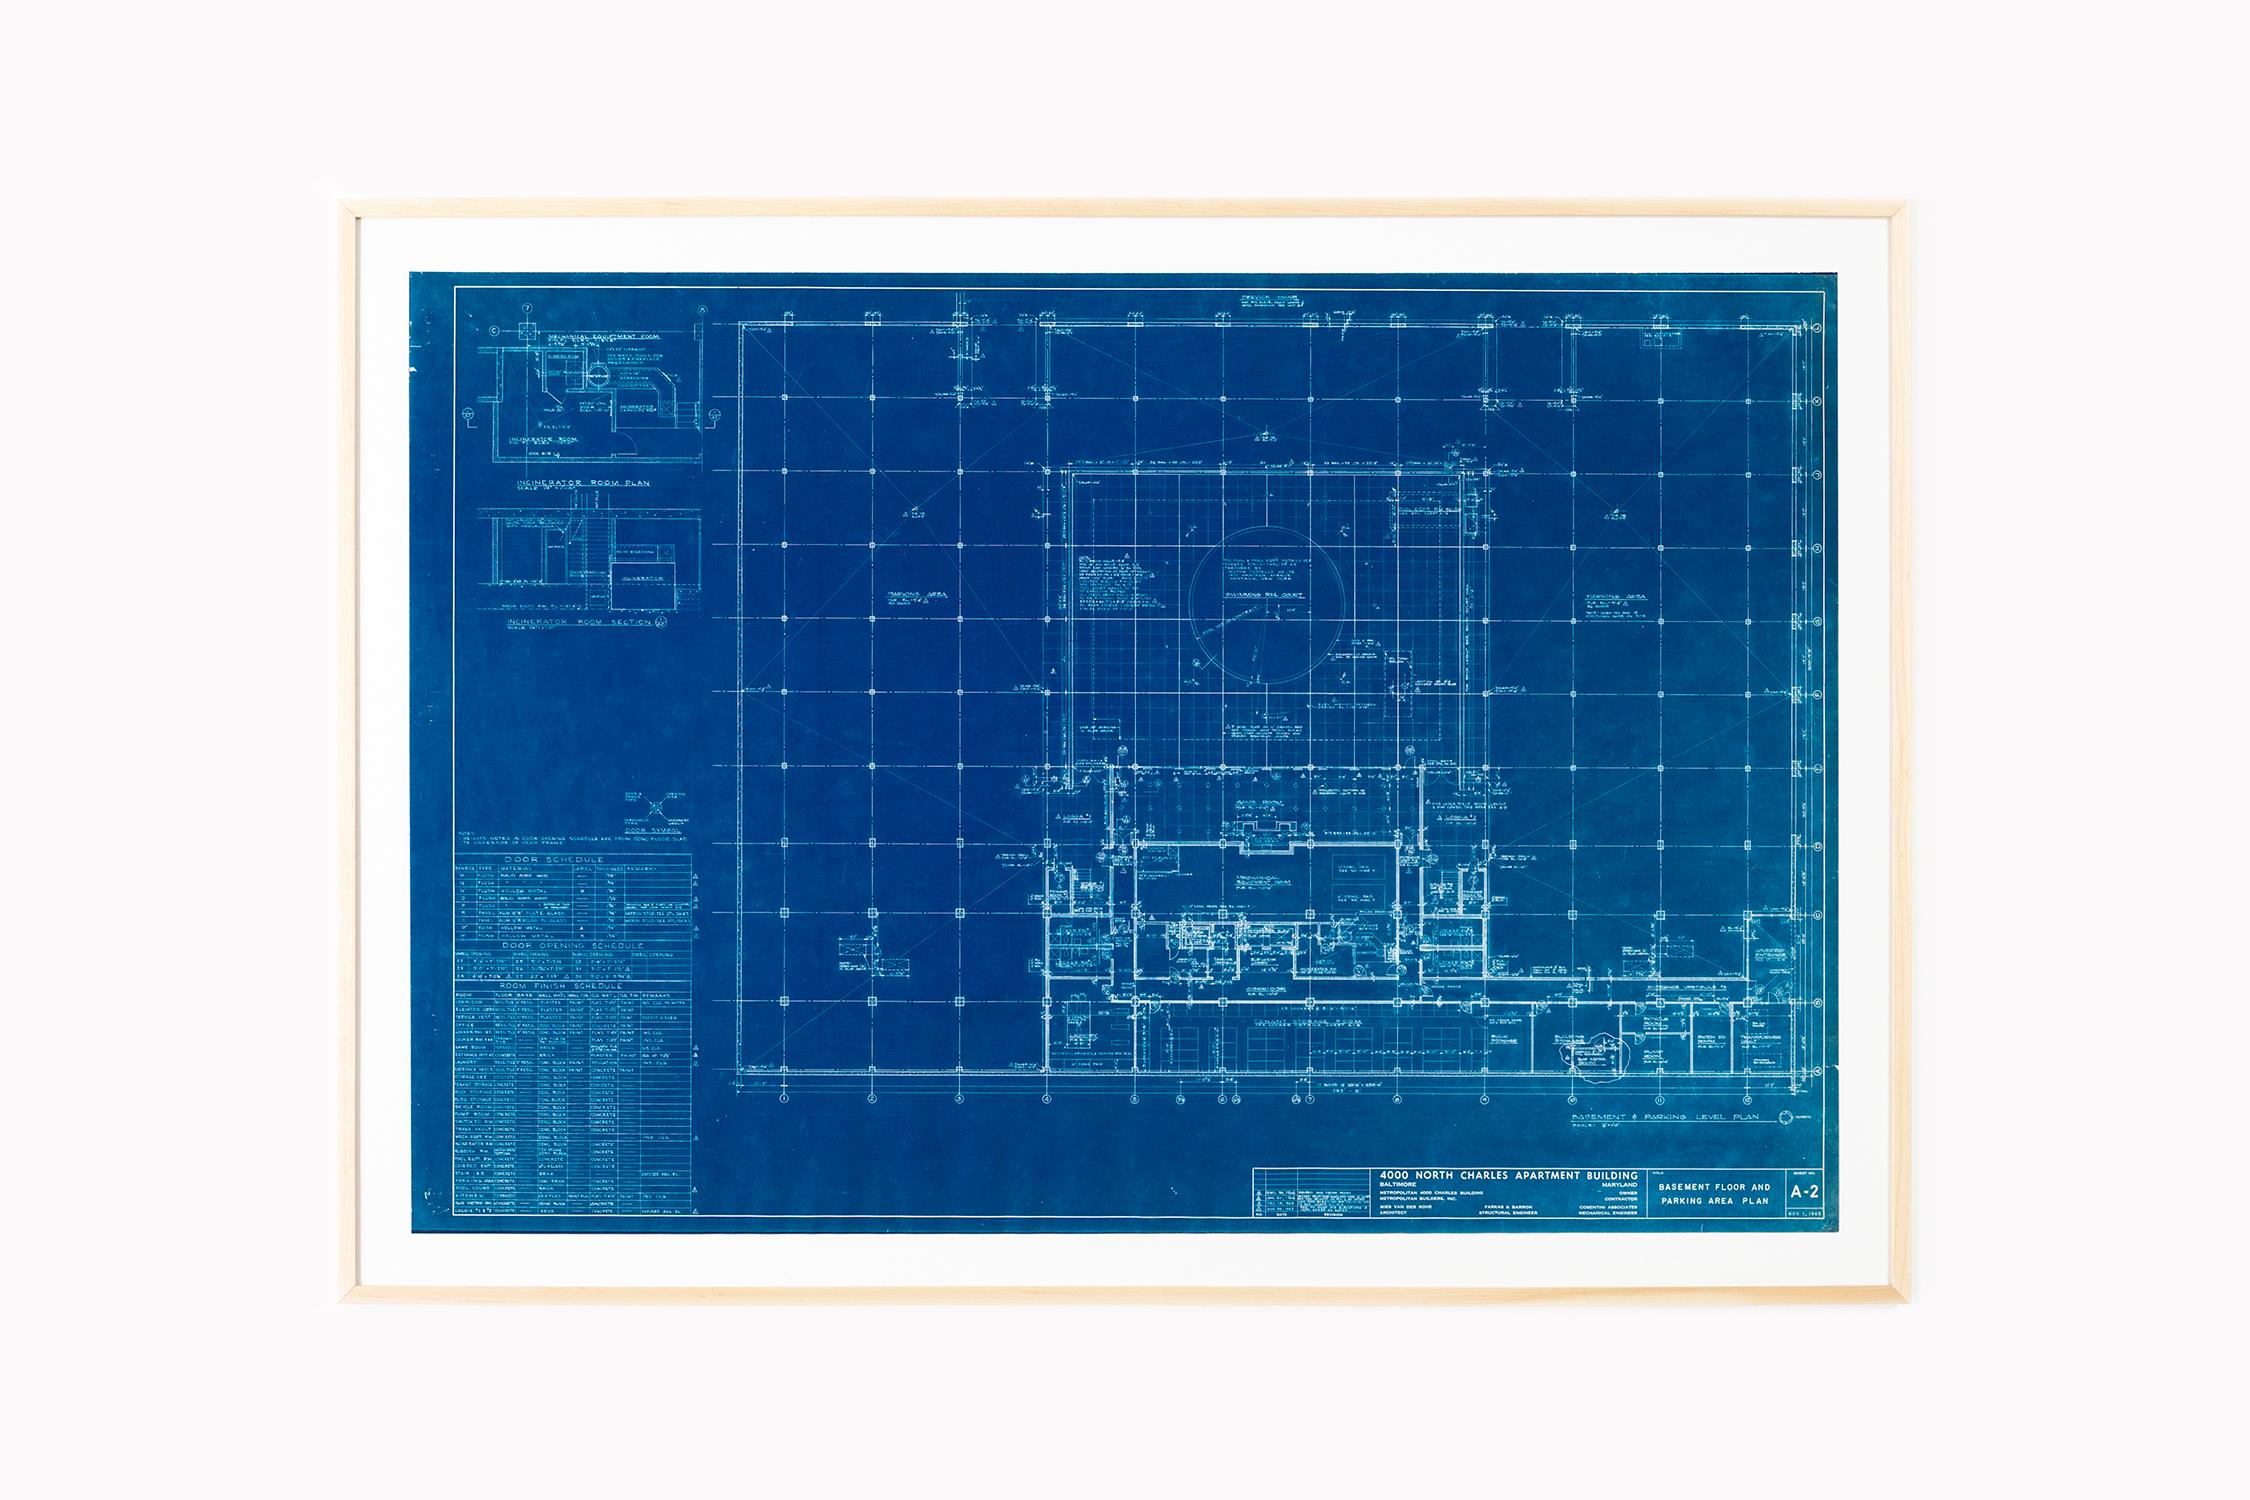 Mid-20th Century Mies van der Rohe Blueprint, One Charles Center, Baltimore 1961, Elevations 